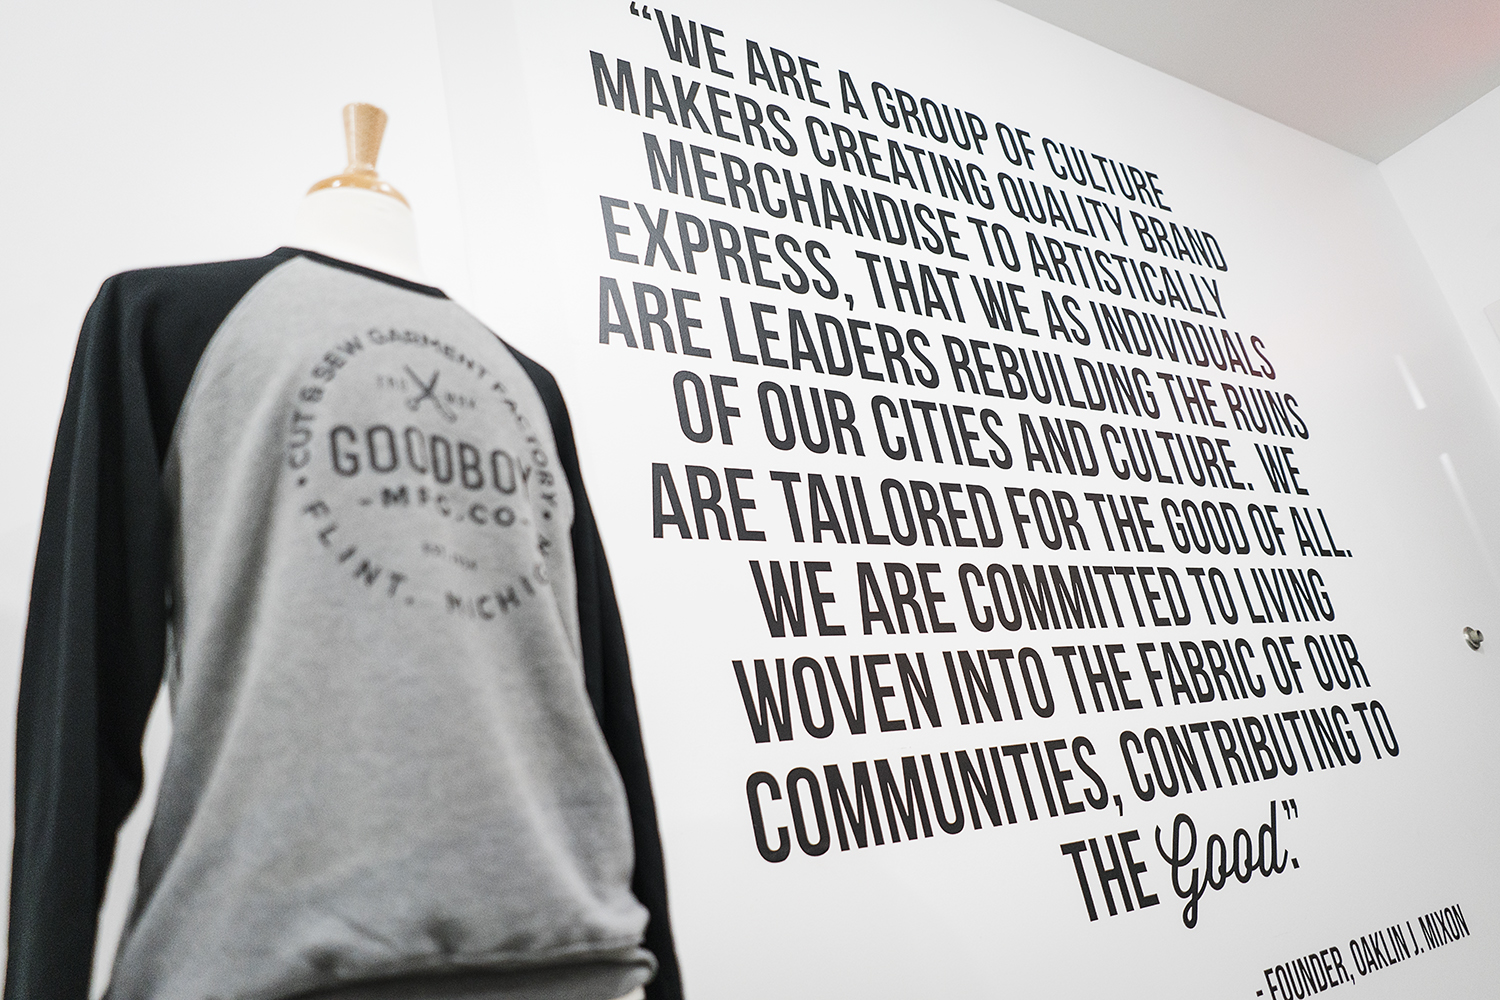 Vinyl graphics, photographs and other decorations are hung on the walls of the new GoodBoy Clothing showroom in preparation for the upcoming grand opening event on Friday, November 17, 2017 at GoodBoy Clothing in downtown Flint.